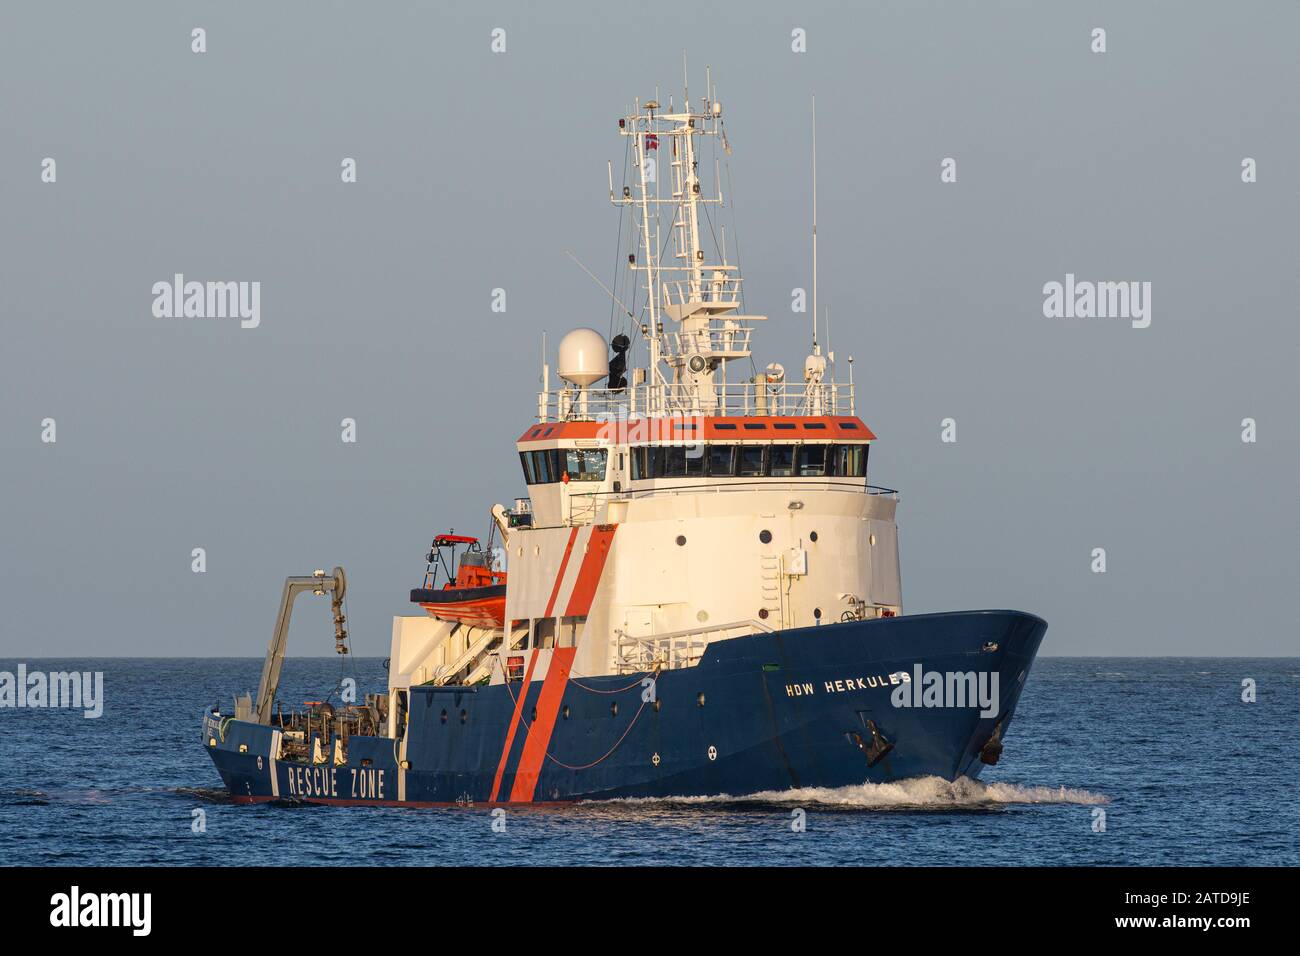 Sottomarino Standby Nave Hdw Herkules Foto Stock